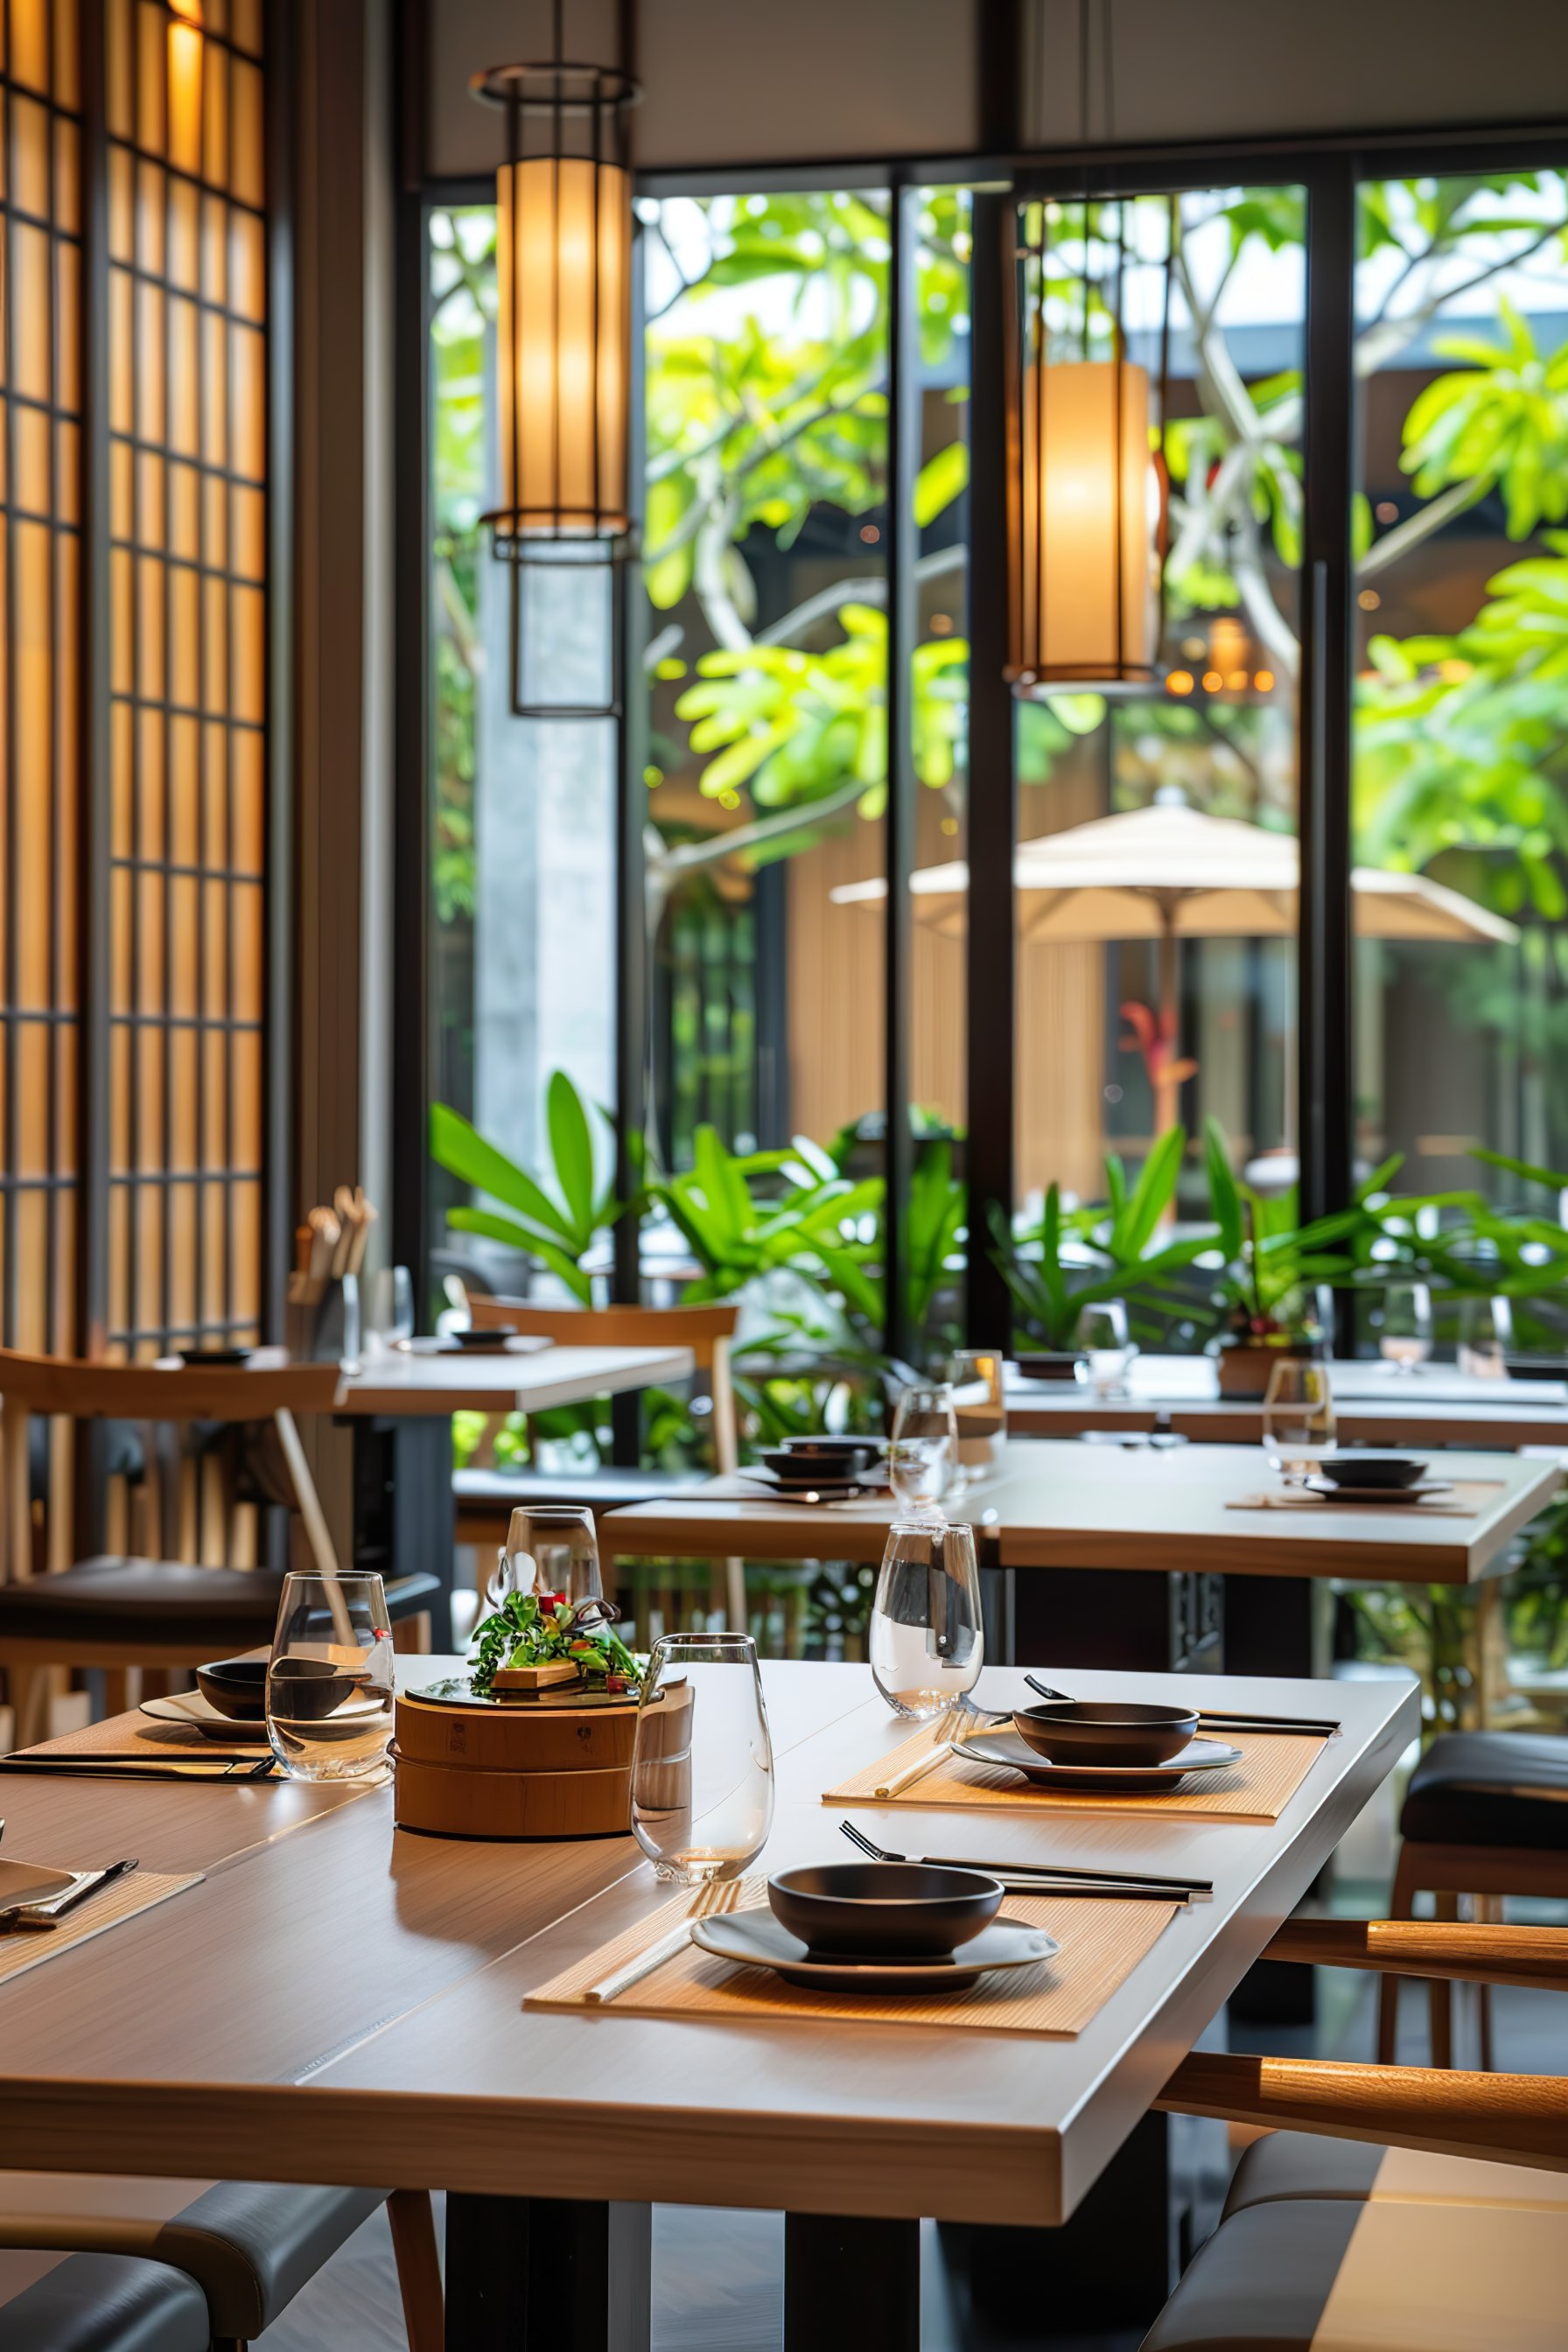 Elegant dining setup in a modern restaurant with warm lighting, tableware on wooden tables, and greenery in the background.